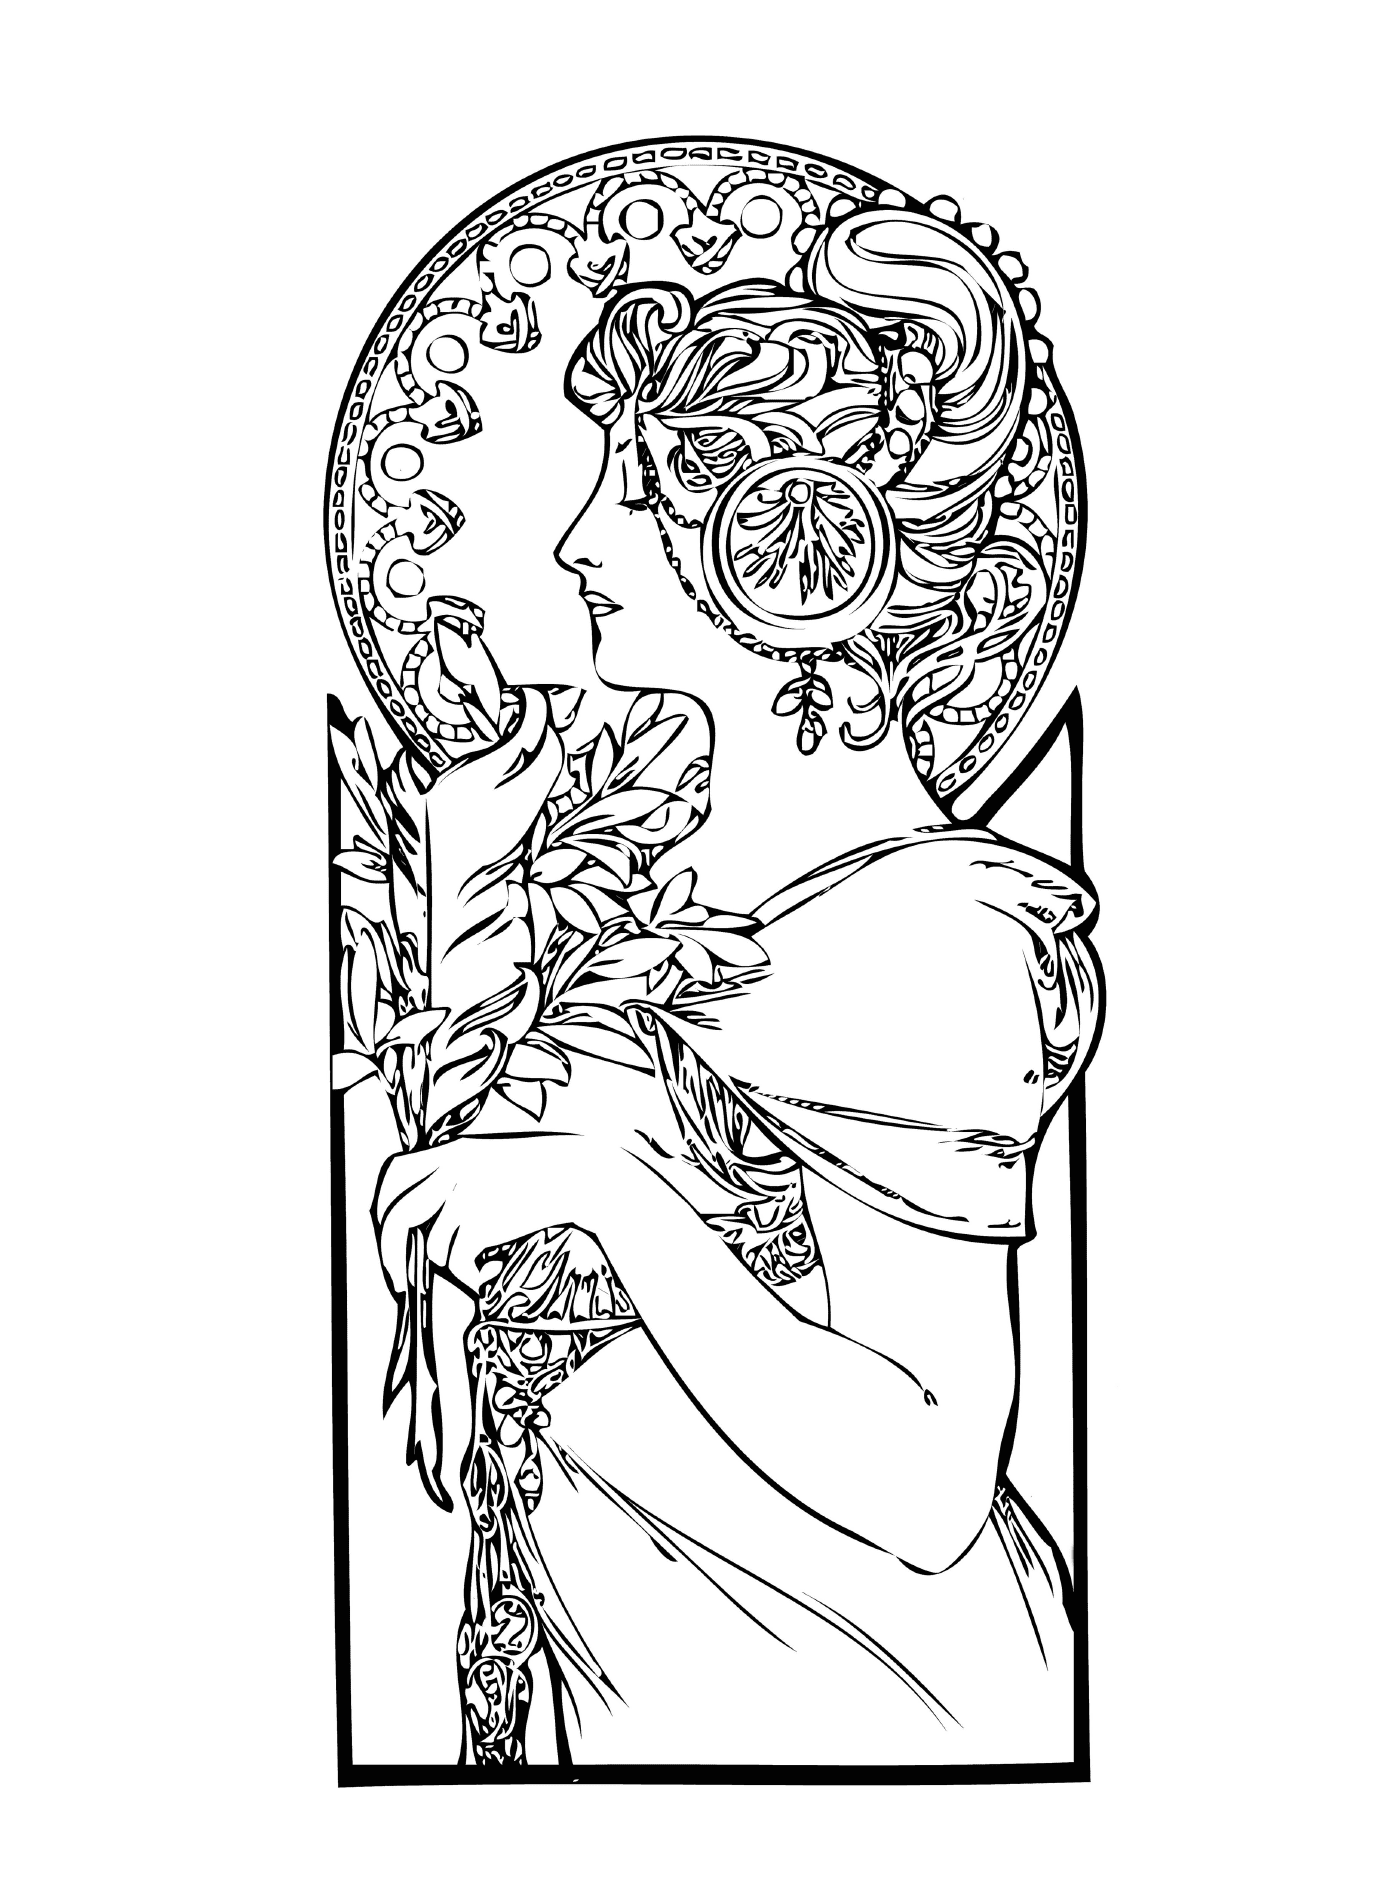  a woman holding flowers in the art nouveau style 